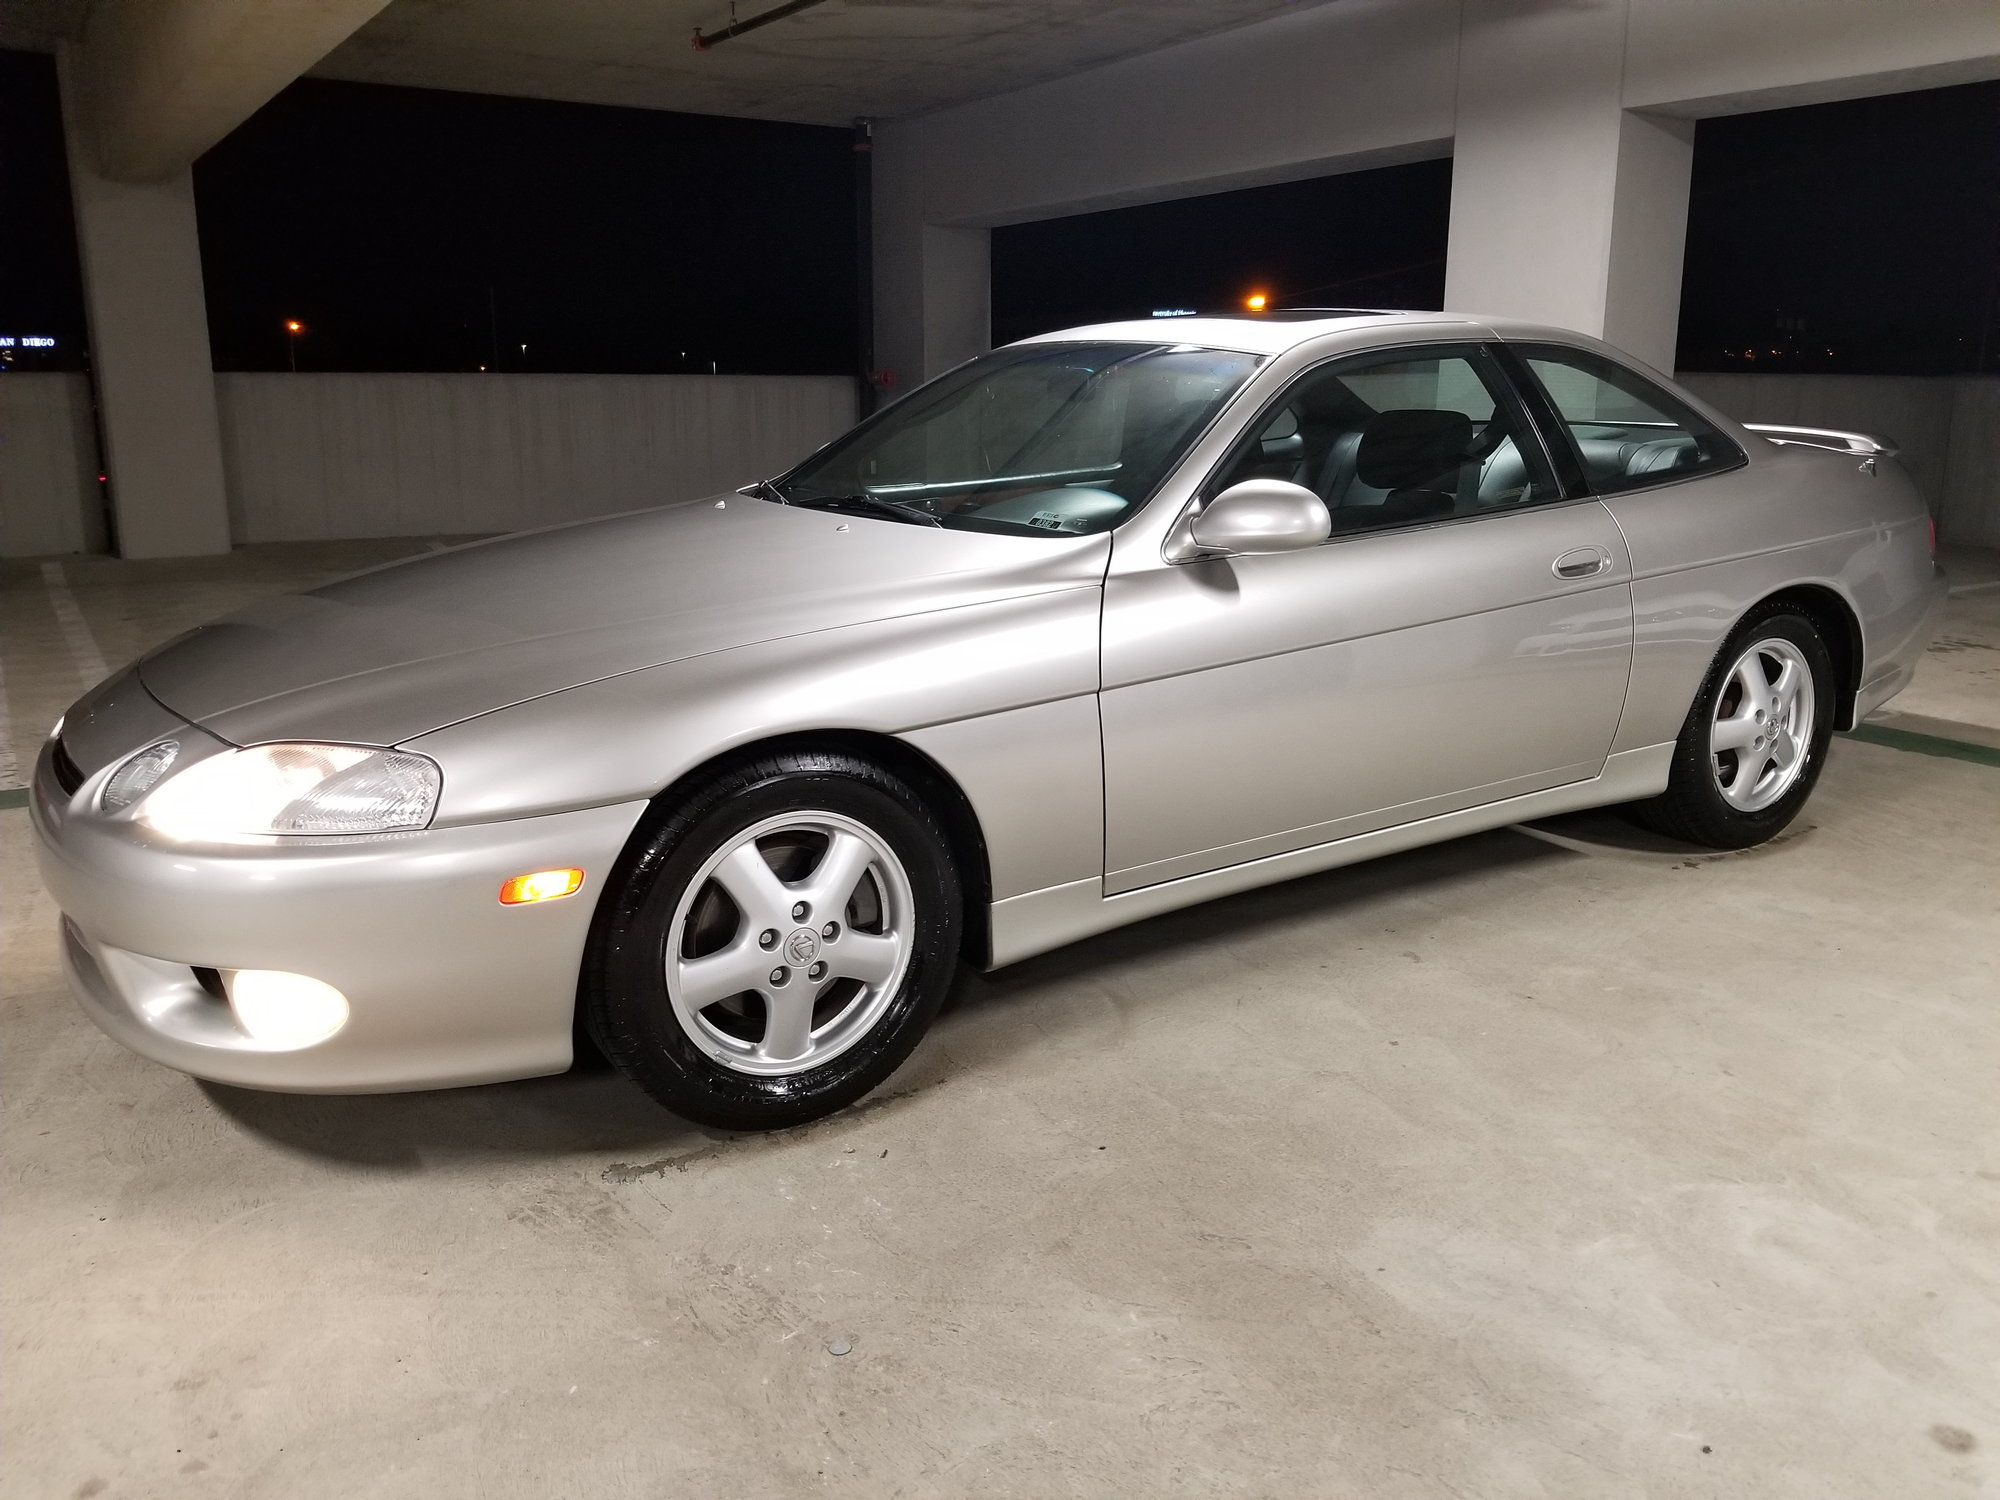 1999 Lexus SC400 - 1999 Lexus SC 400 - Used - VIN JT8CH32Y4X1002038 - 199,000 Miles - 8 cyl - 2WD - Automatic - Coupe - Silver - San Diego, CA 92126, United States